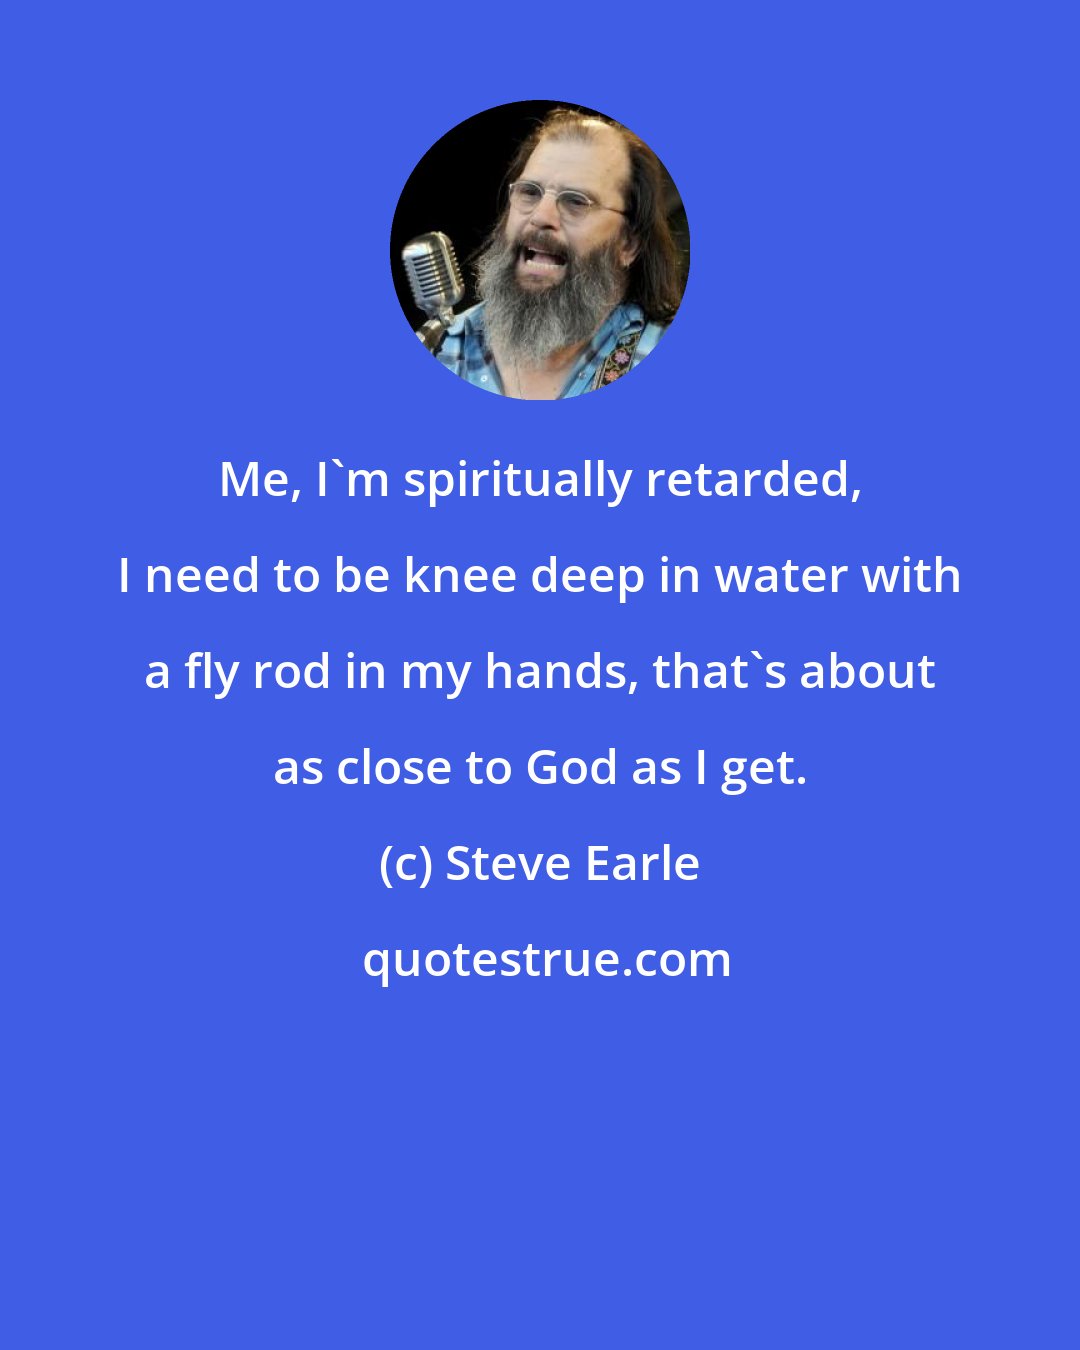 Steve Earle: Me, I'm spiritually retarded, I need to be knee deep in water with a fly rod in my hands, that's about as close to God as I get.